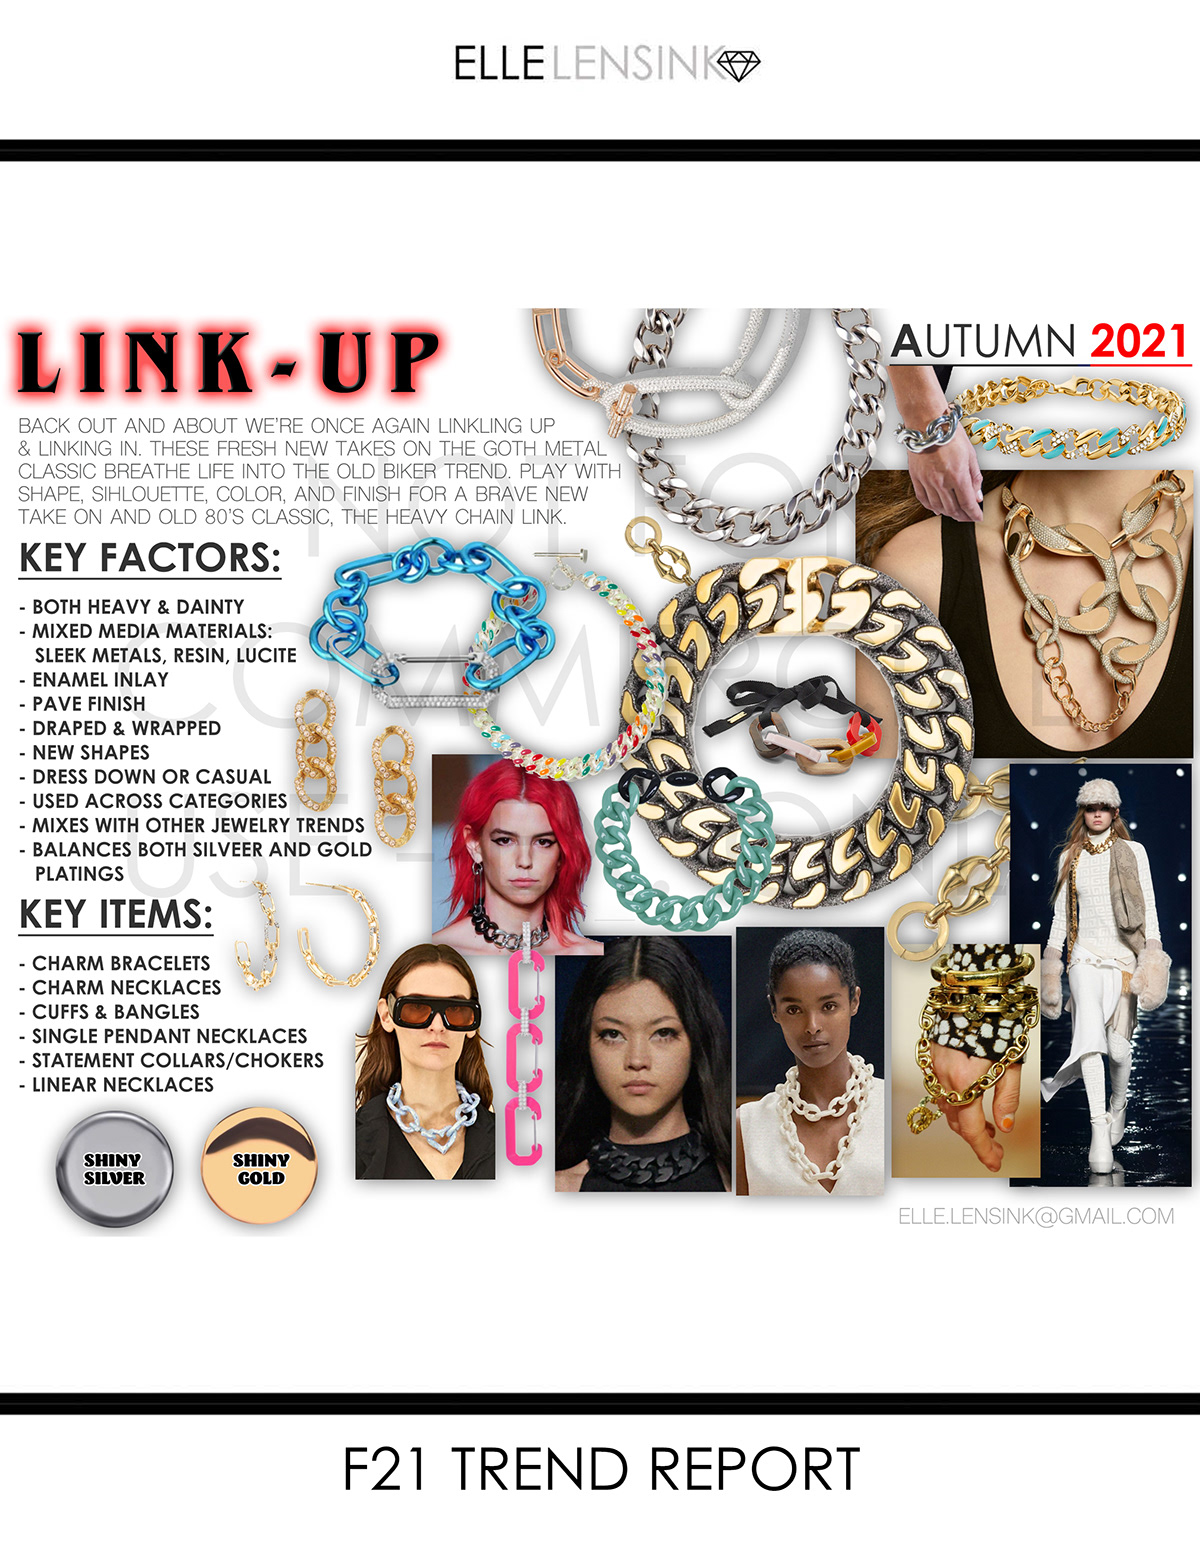 color story COSTUME JEWELRY TRENDS fall 2021 FASHION JEWELRY TRENDS jewelry trends mood board storyboarding   trend board jewelry trend forecast trend forecasting